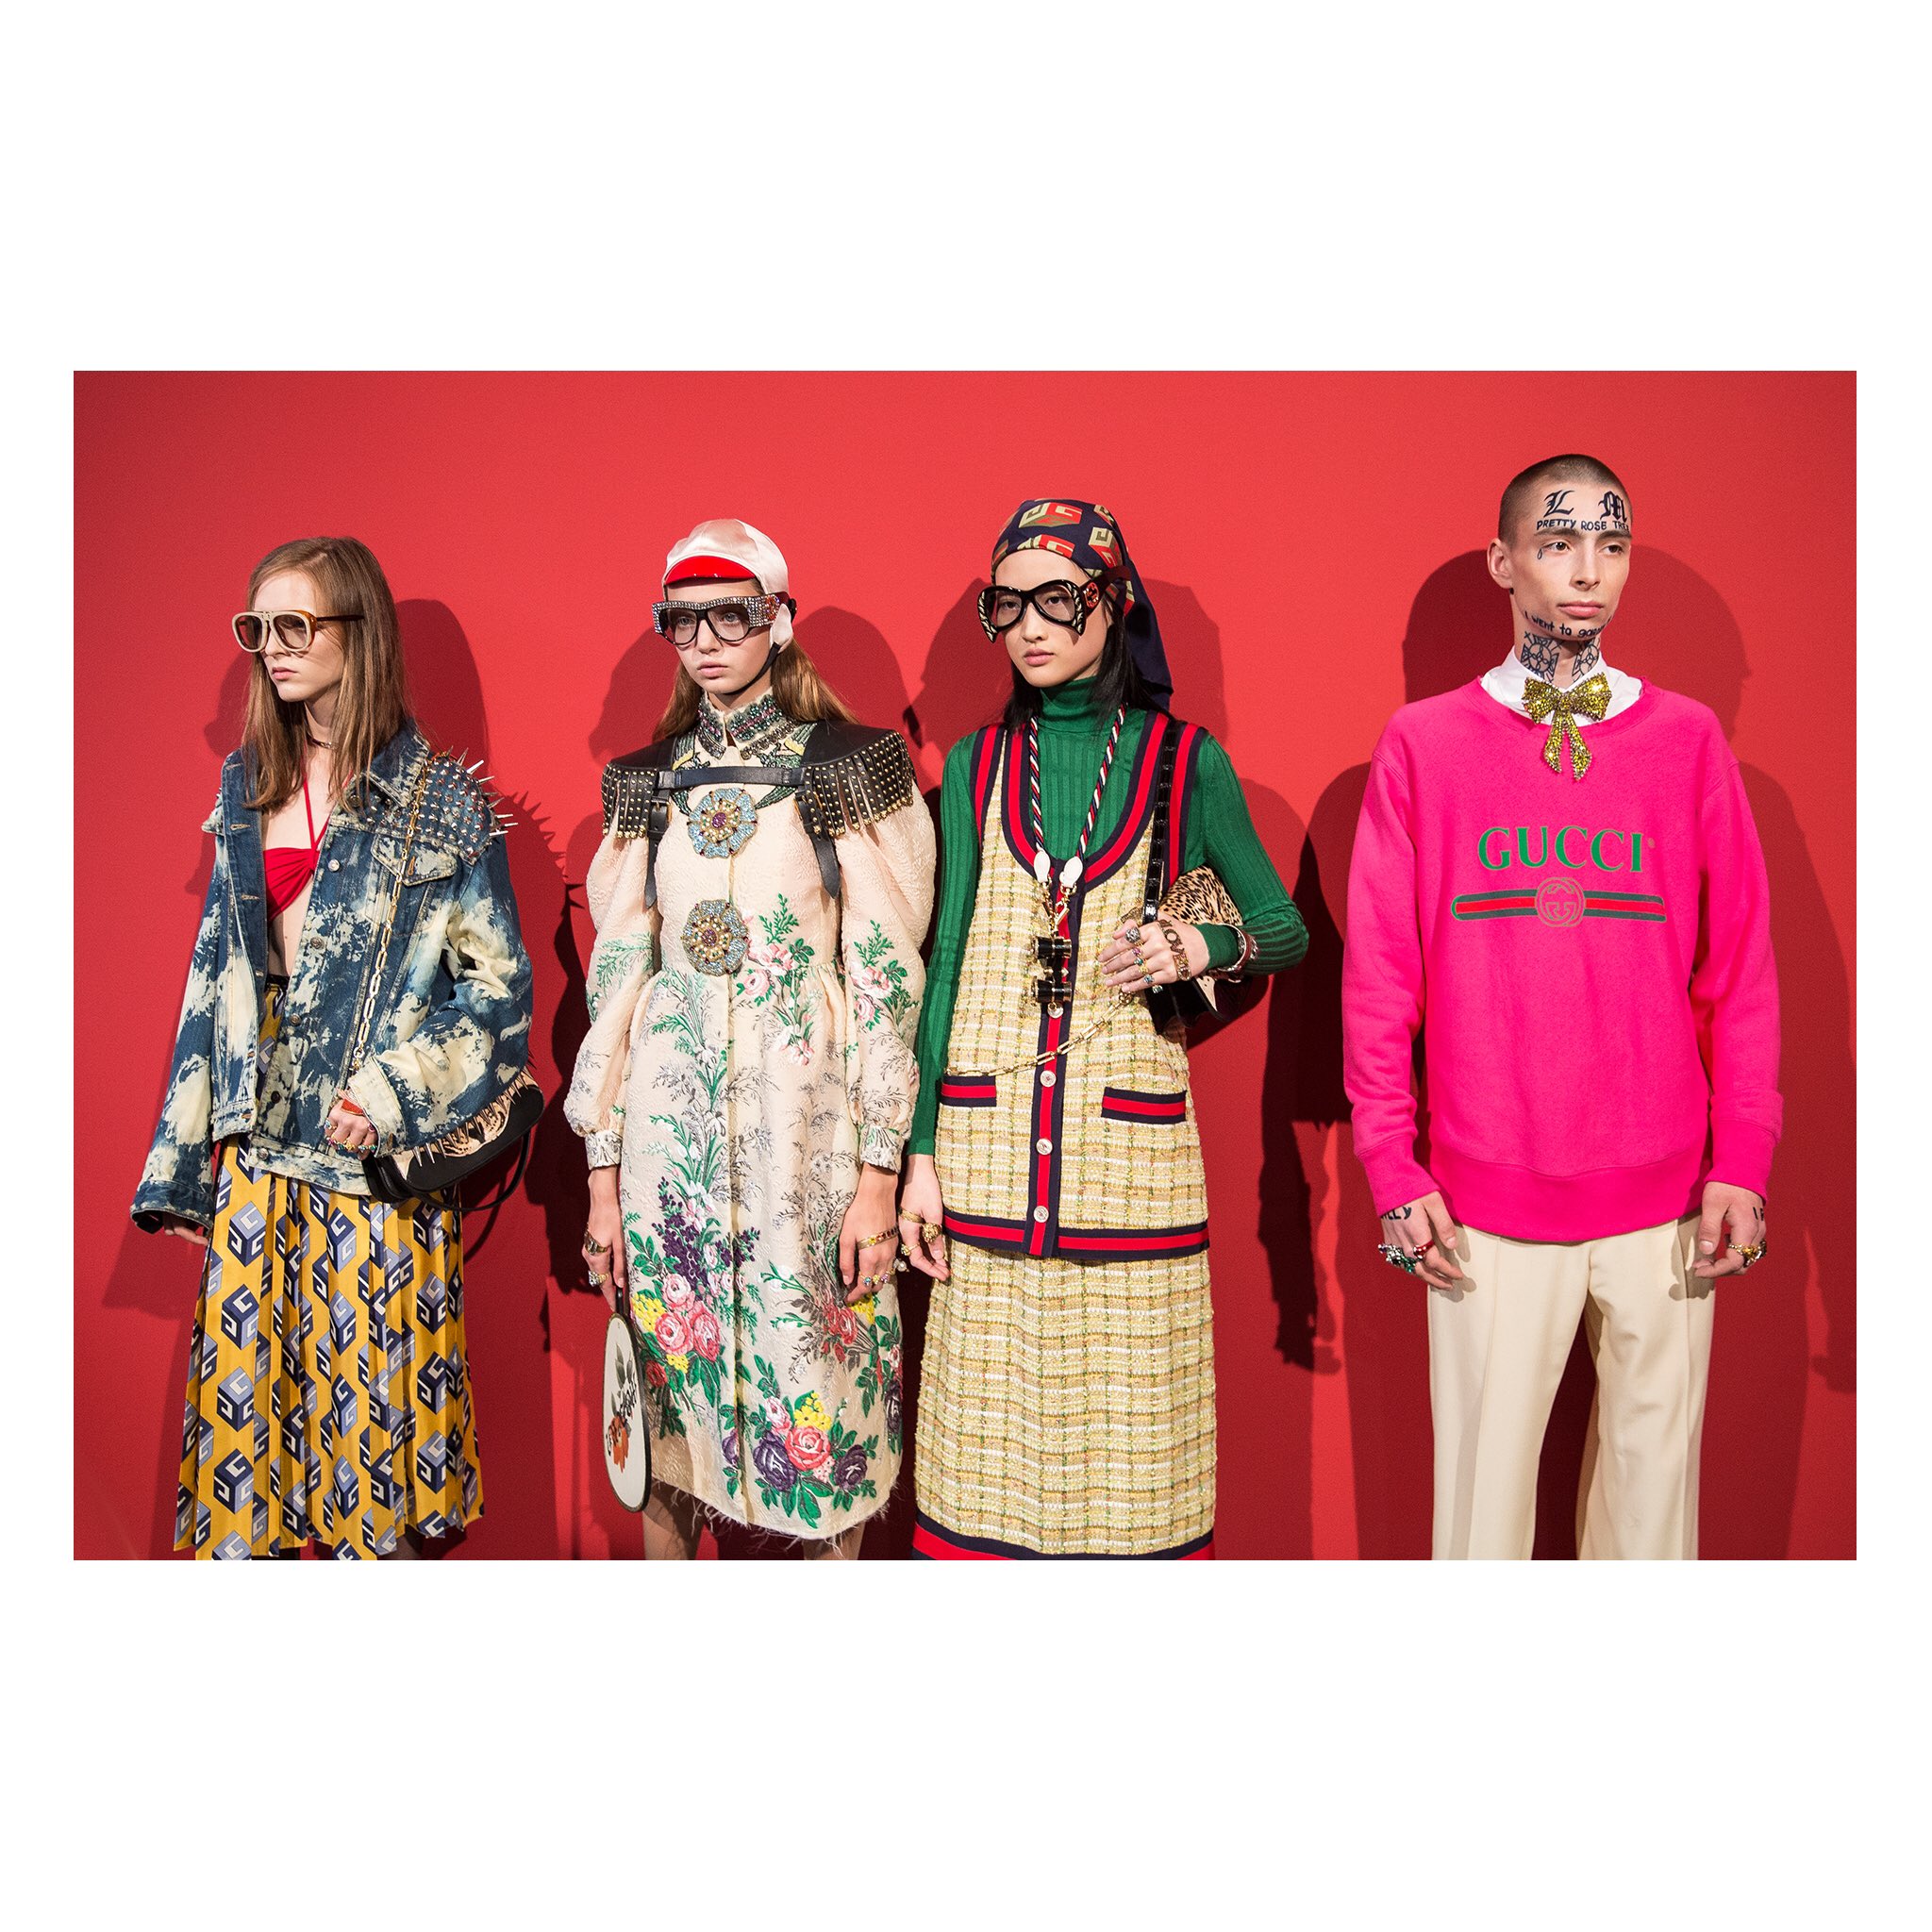 Diplomatieke kwesties betrouwbaarheid mechanisme gucci on Twitter: "Eclectic characters of the women's #GucciSS17 fashion  show by #AlessandroMichele. https://t.co/tHayrJj3Gv" / Twitter